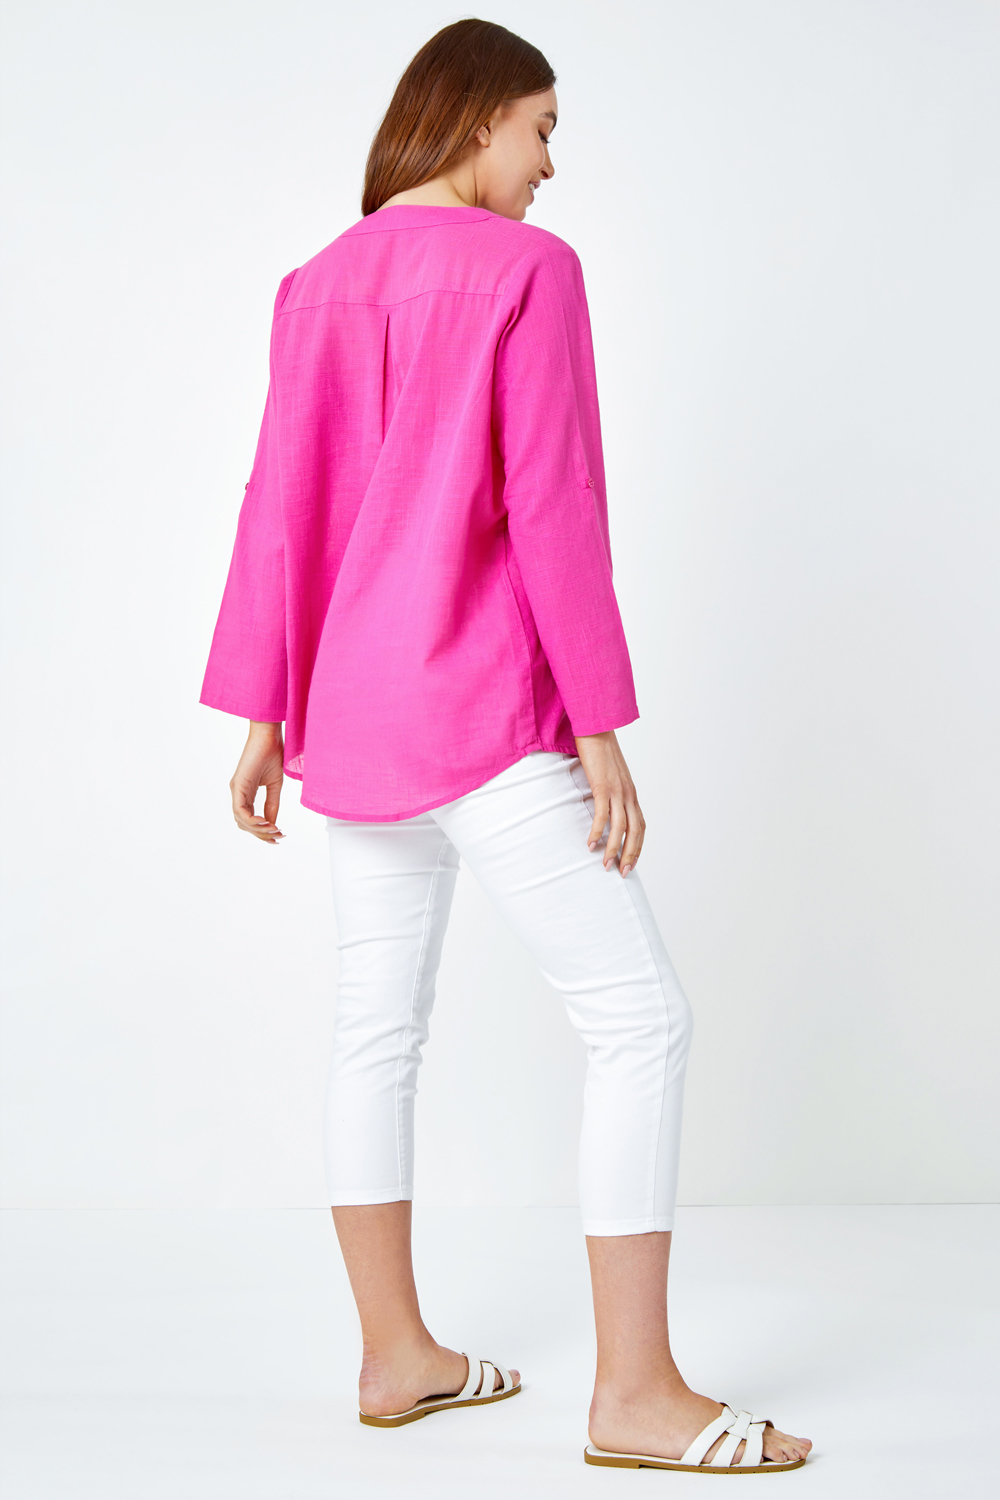 PINK Button Detail Cotton Overshirt, Image 3 of 5